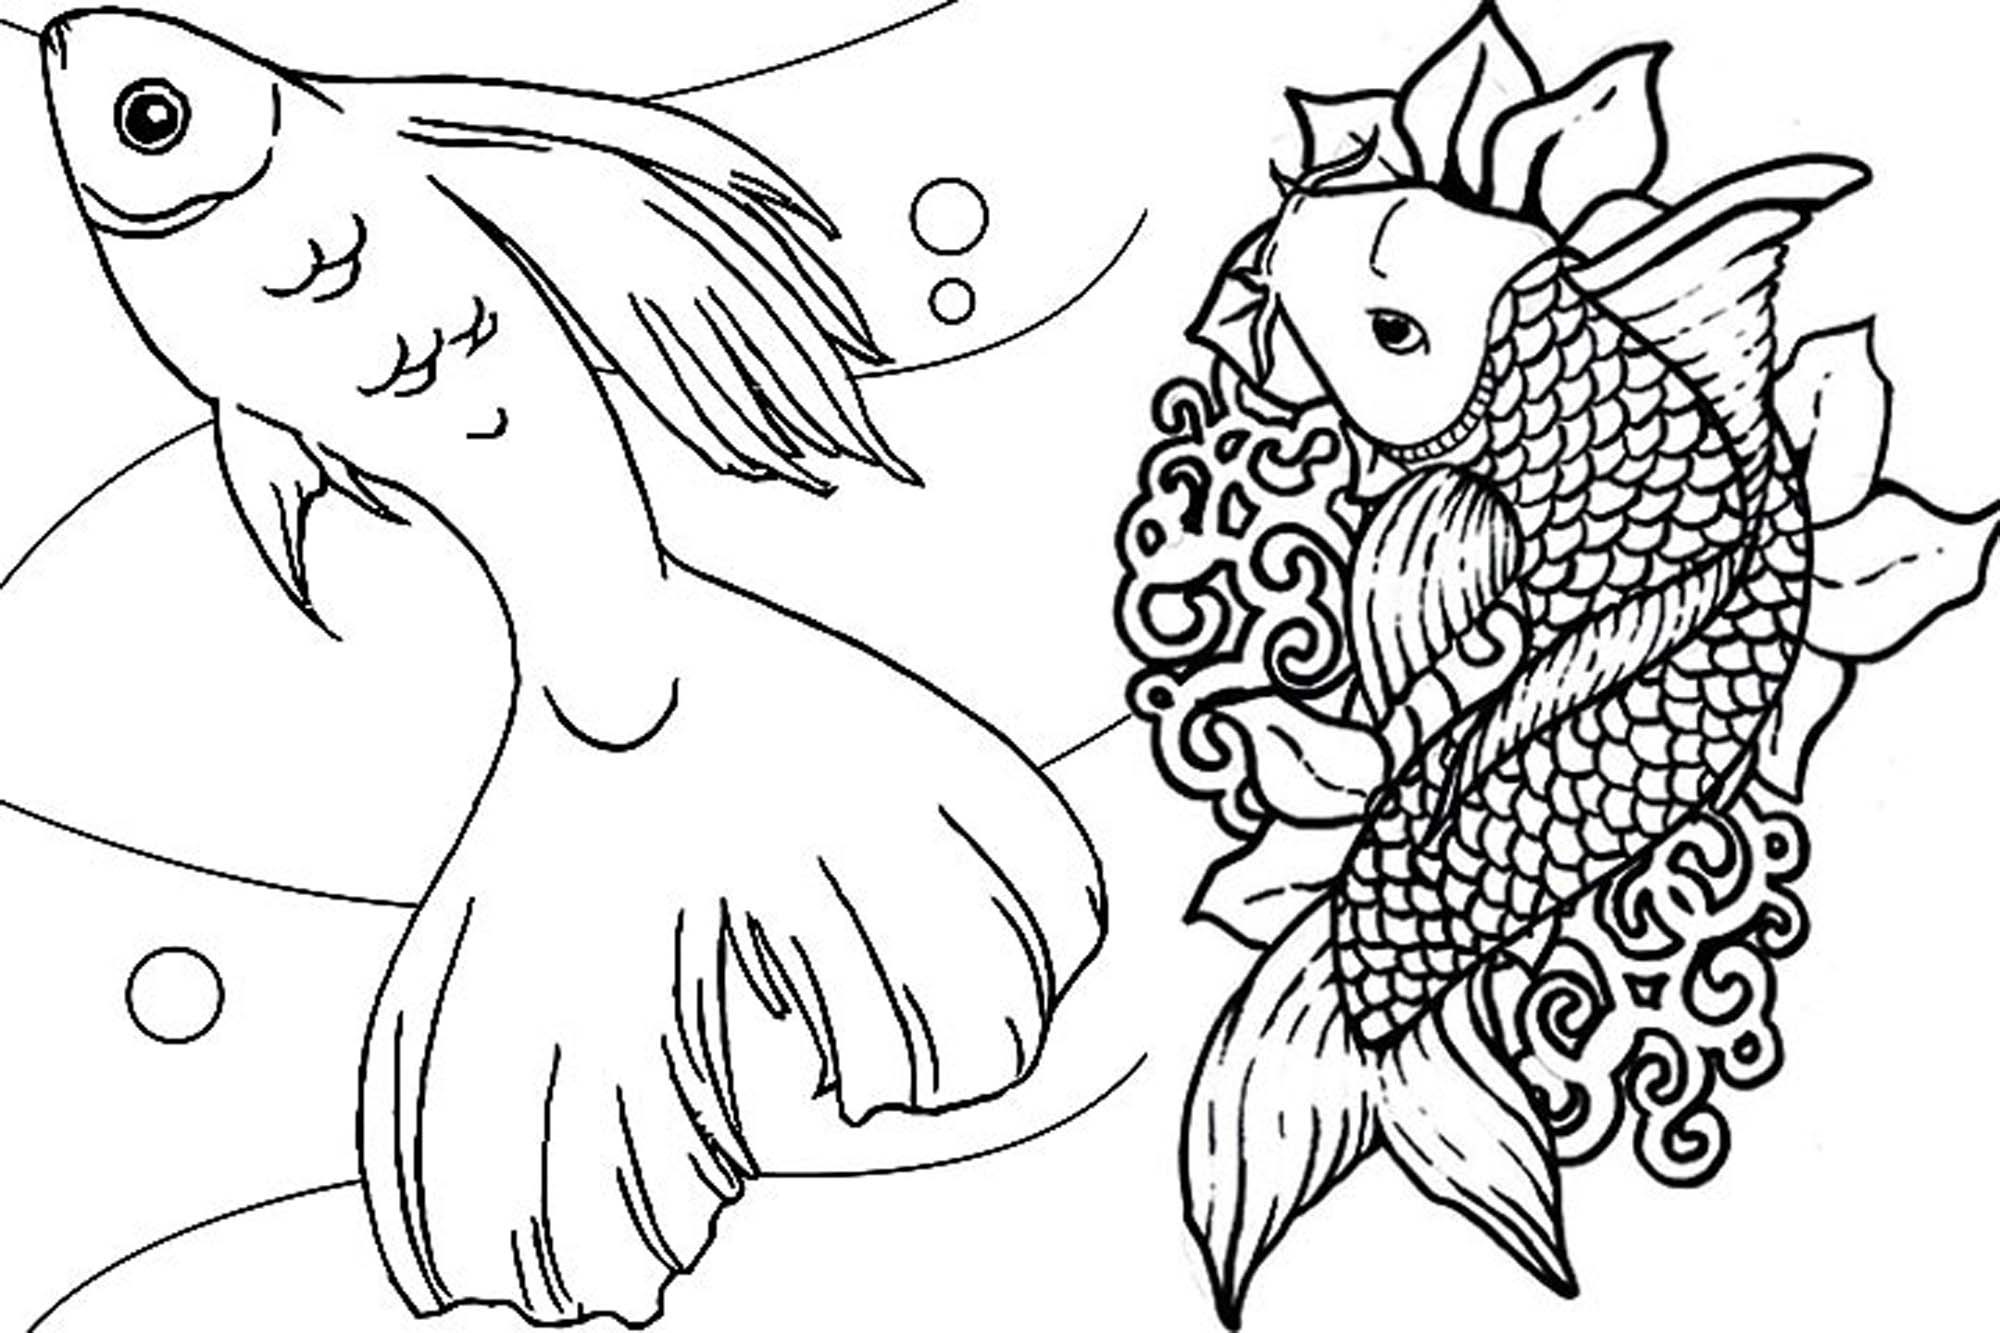 Rainbow Fish Coloring Page at GetColorings.com | Free printable